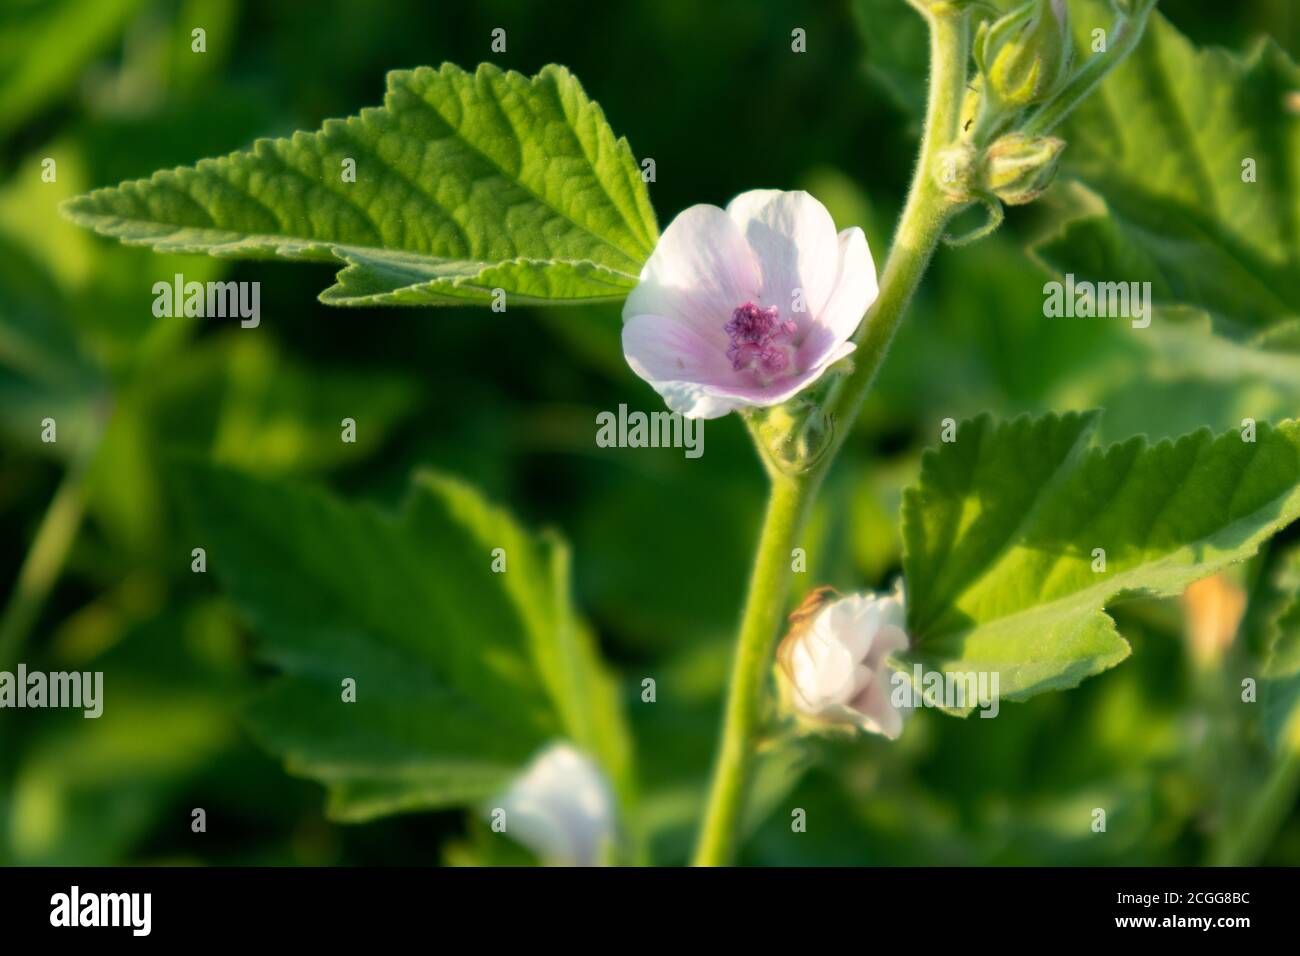 Althaea officinalis, or marsh-mallow, family Malvaceae. Pale pink tender blooming flower with leaves in vibrant greenery background Stock Photo